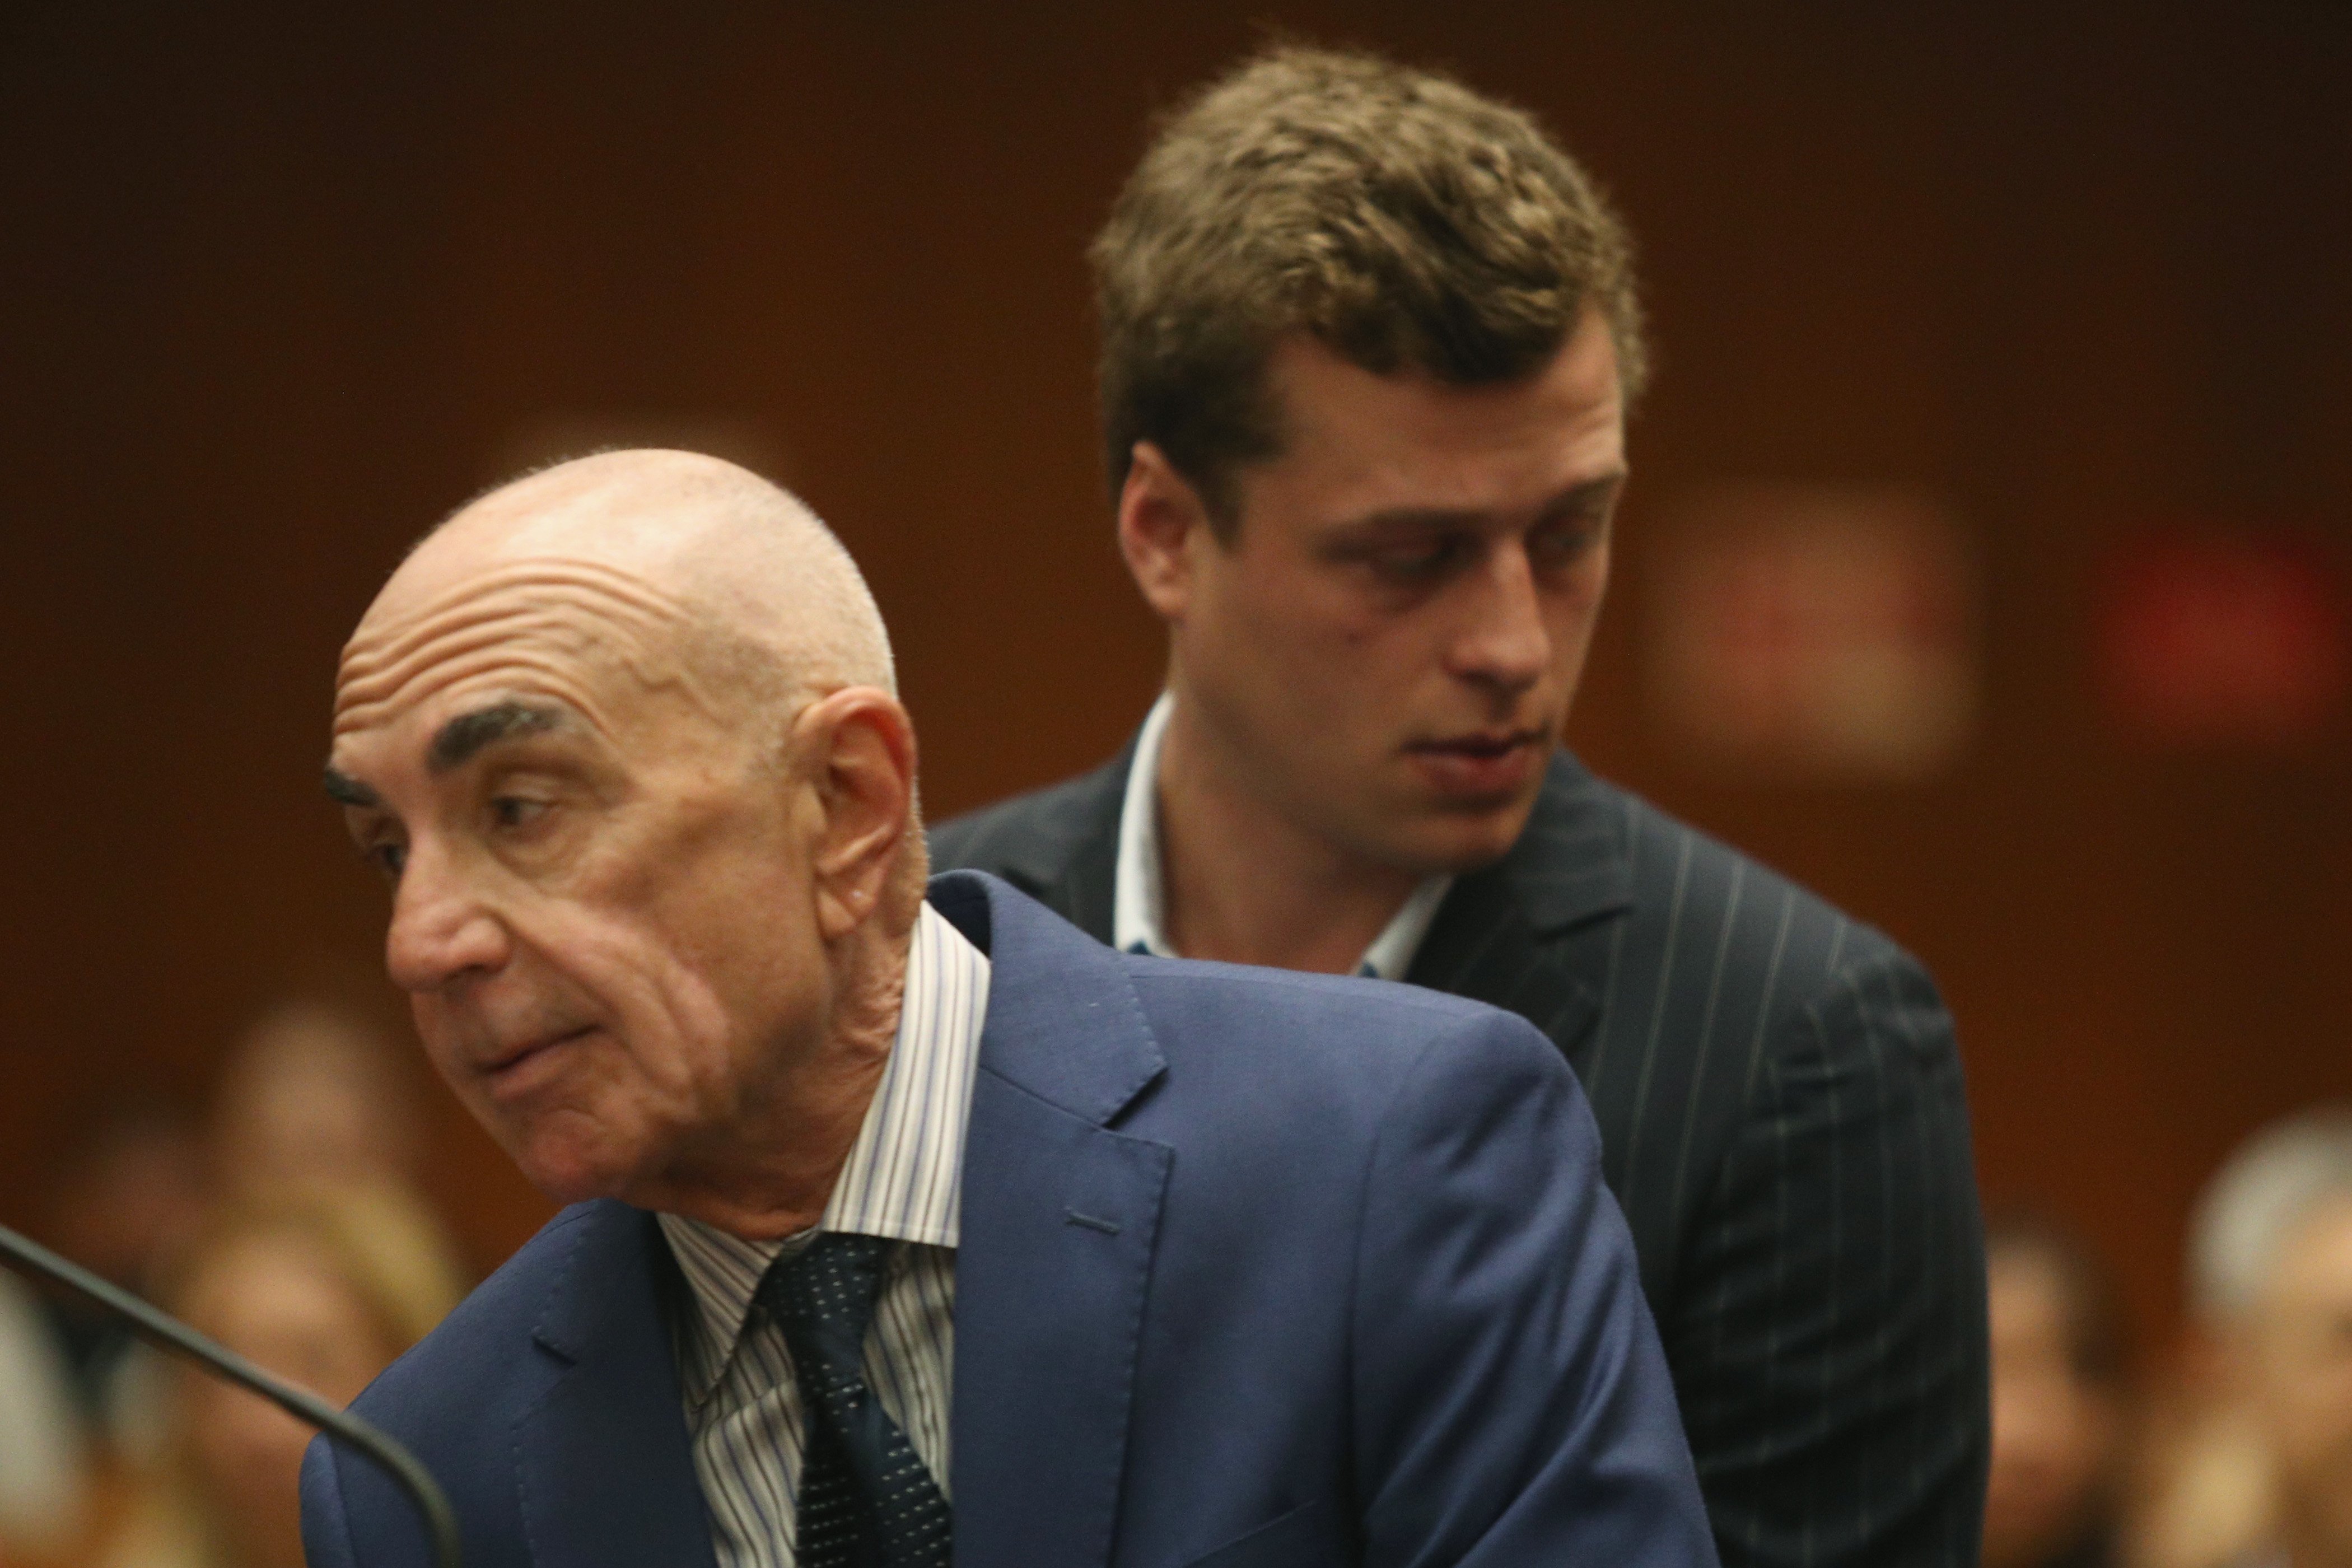 Attorney Robert Shapiro (front) and Conrad Hilton at Hilton's arraignment at Clara Shortridge Foltz Criminal Justice Center on June 29, 2017, in Los Angeles, California. | Source: Getty Images